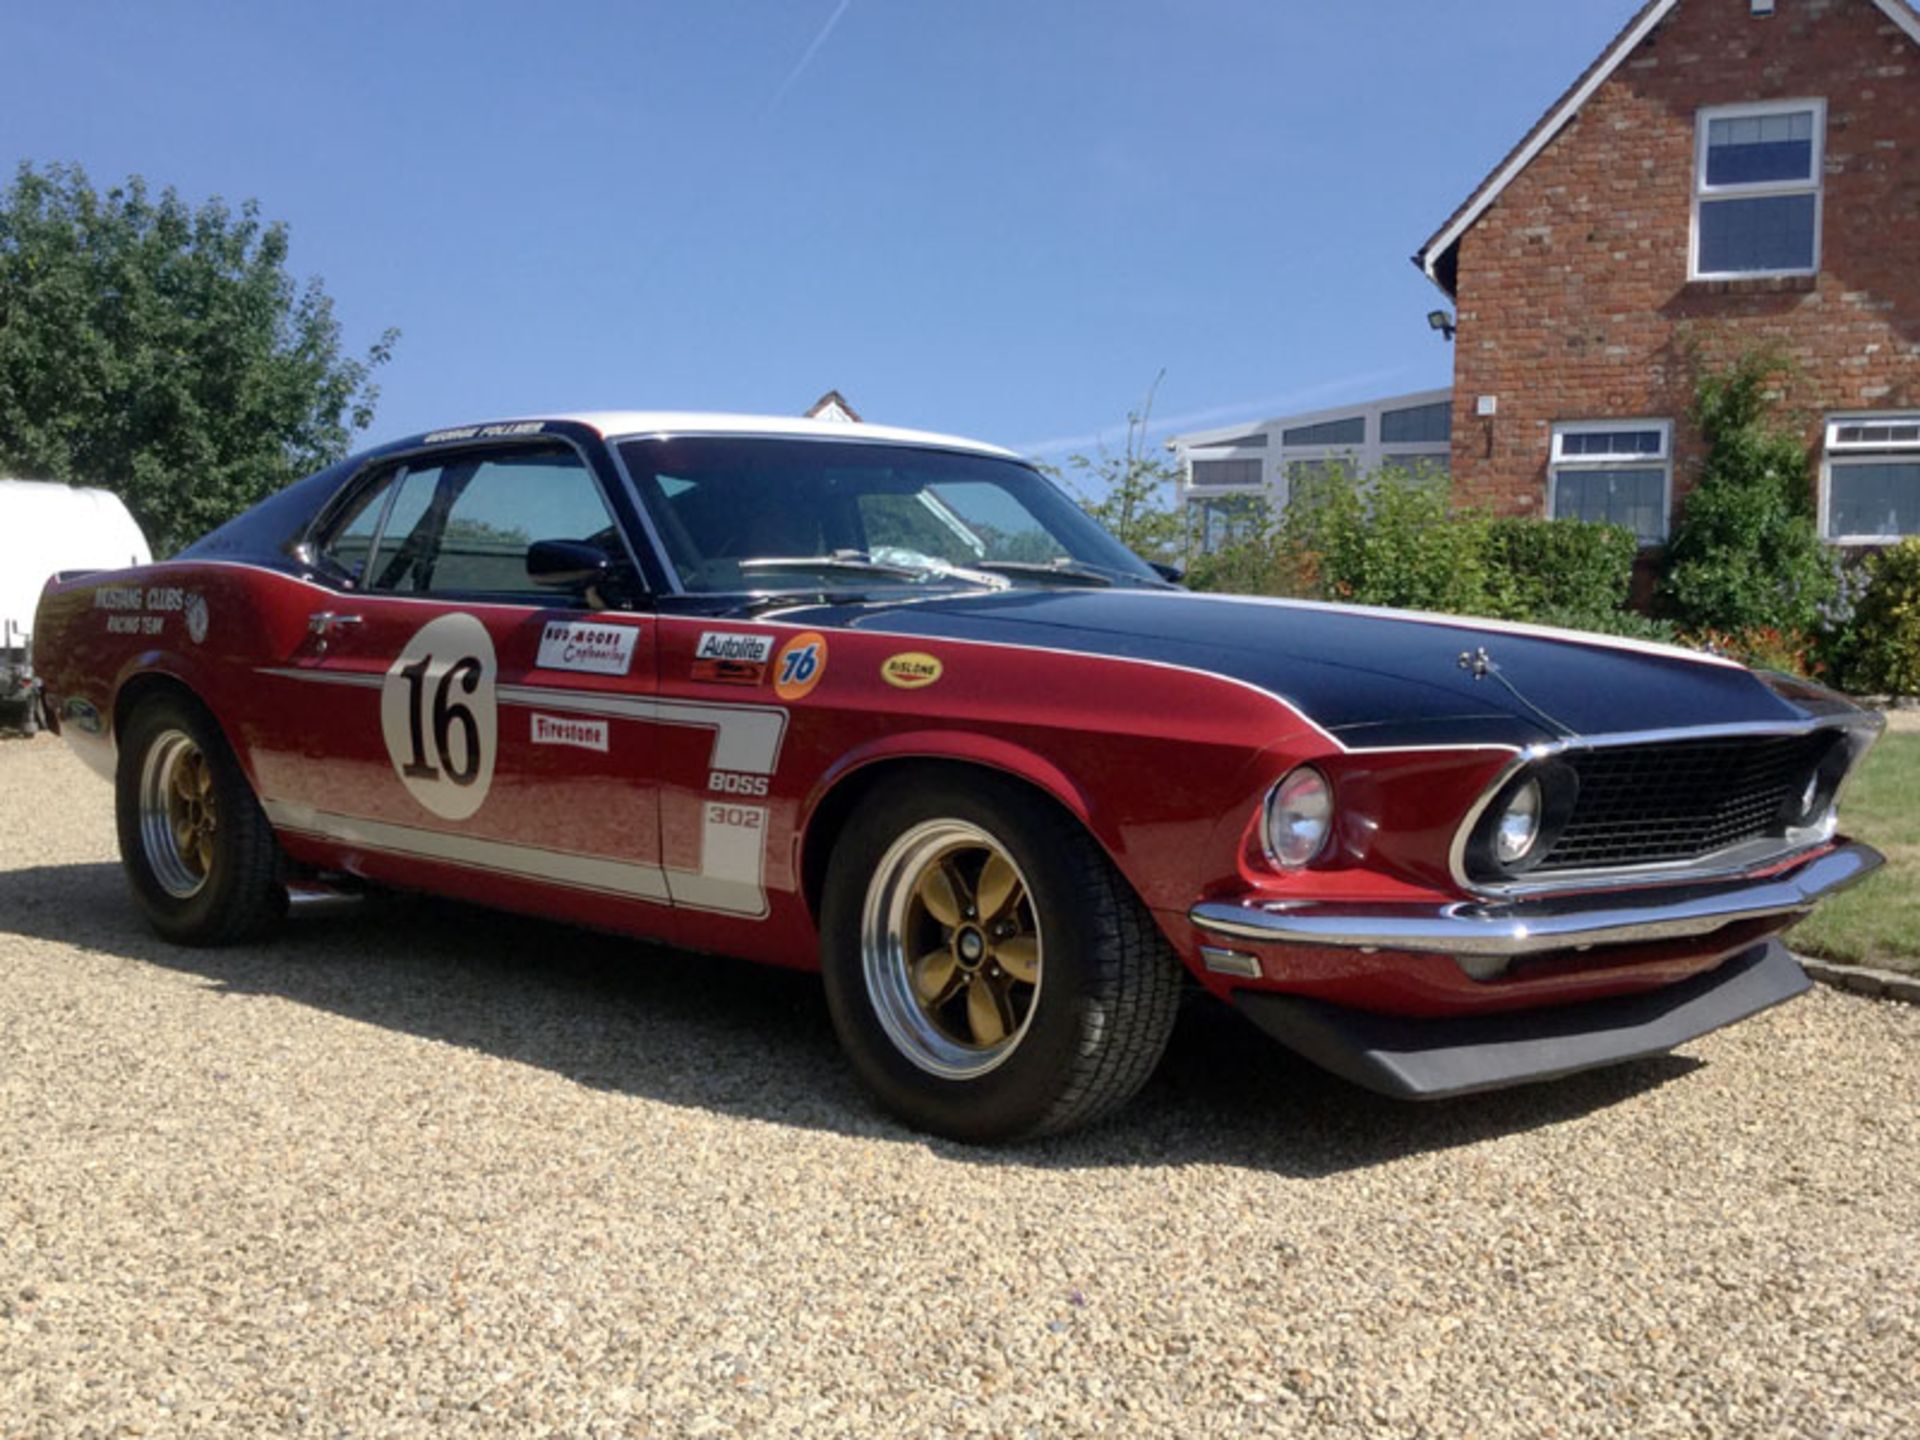 1969 Ford Mustang Bud Moore Trans-Am Tribute Car - Image 2 of 10